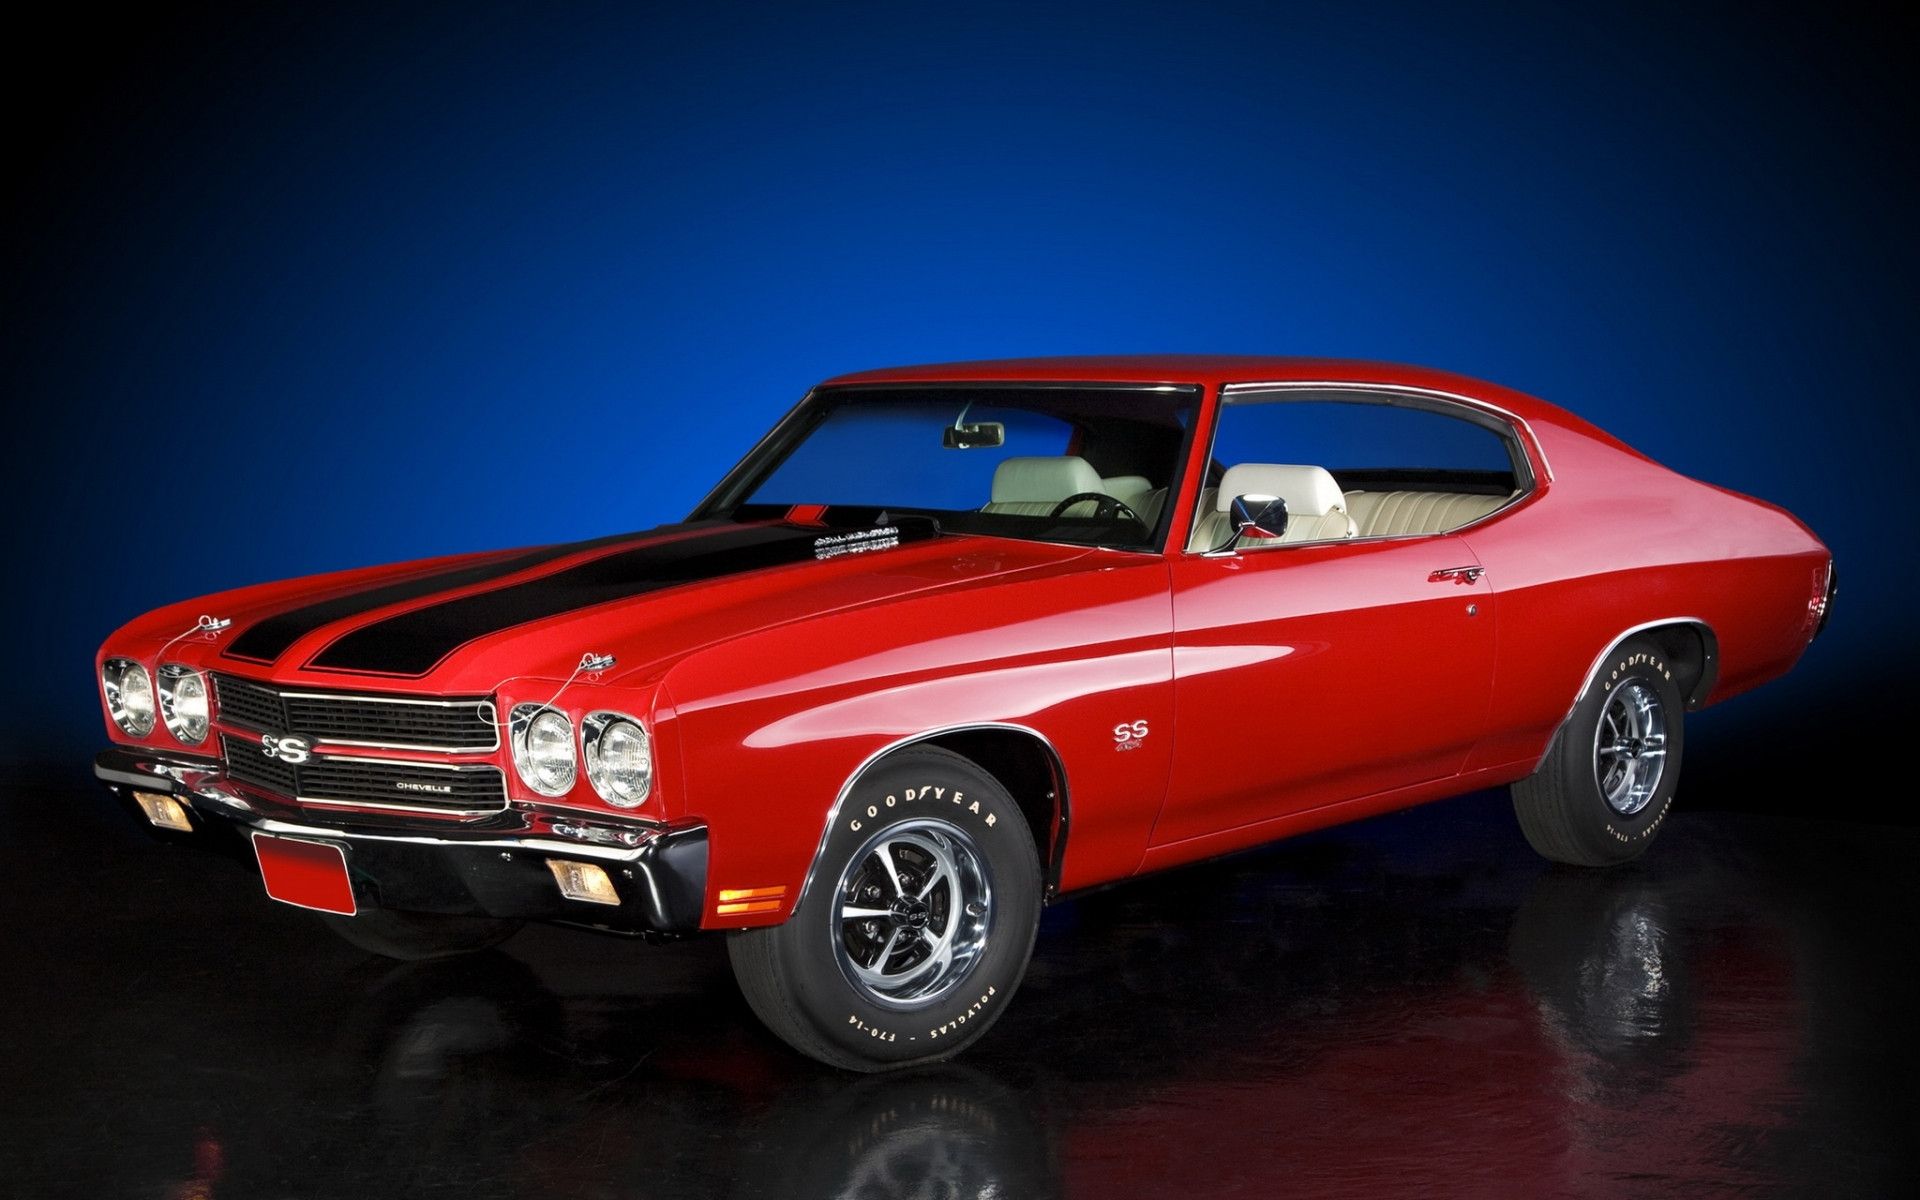 Chevelle SS Wallpapers 1920x1200 20009 KB 1920x1200